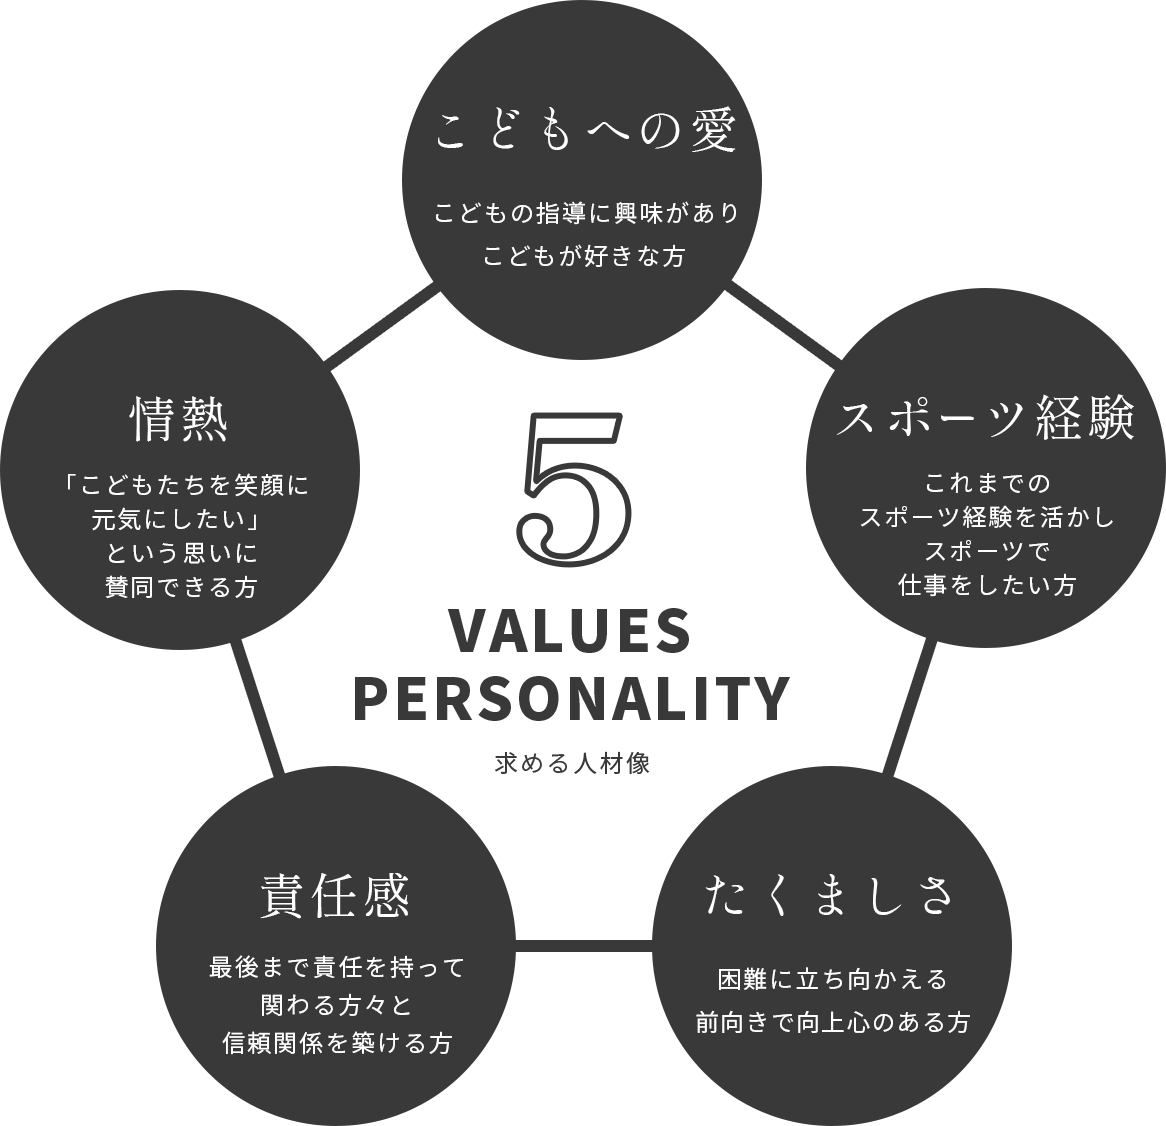 5 VALUES PERSONALITY 求める人材像